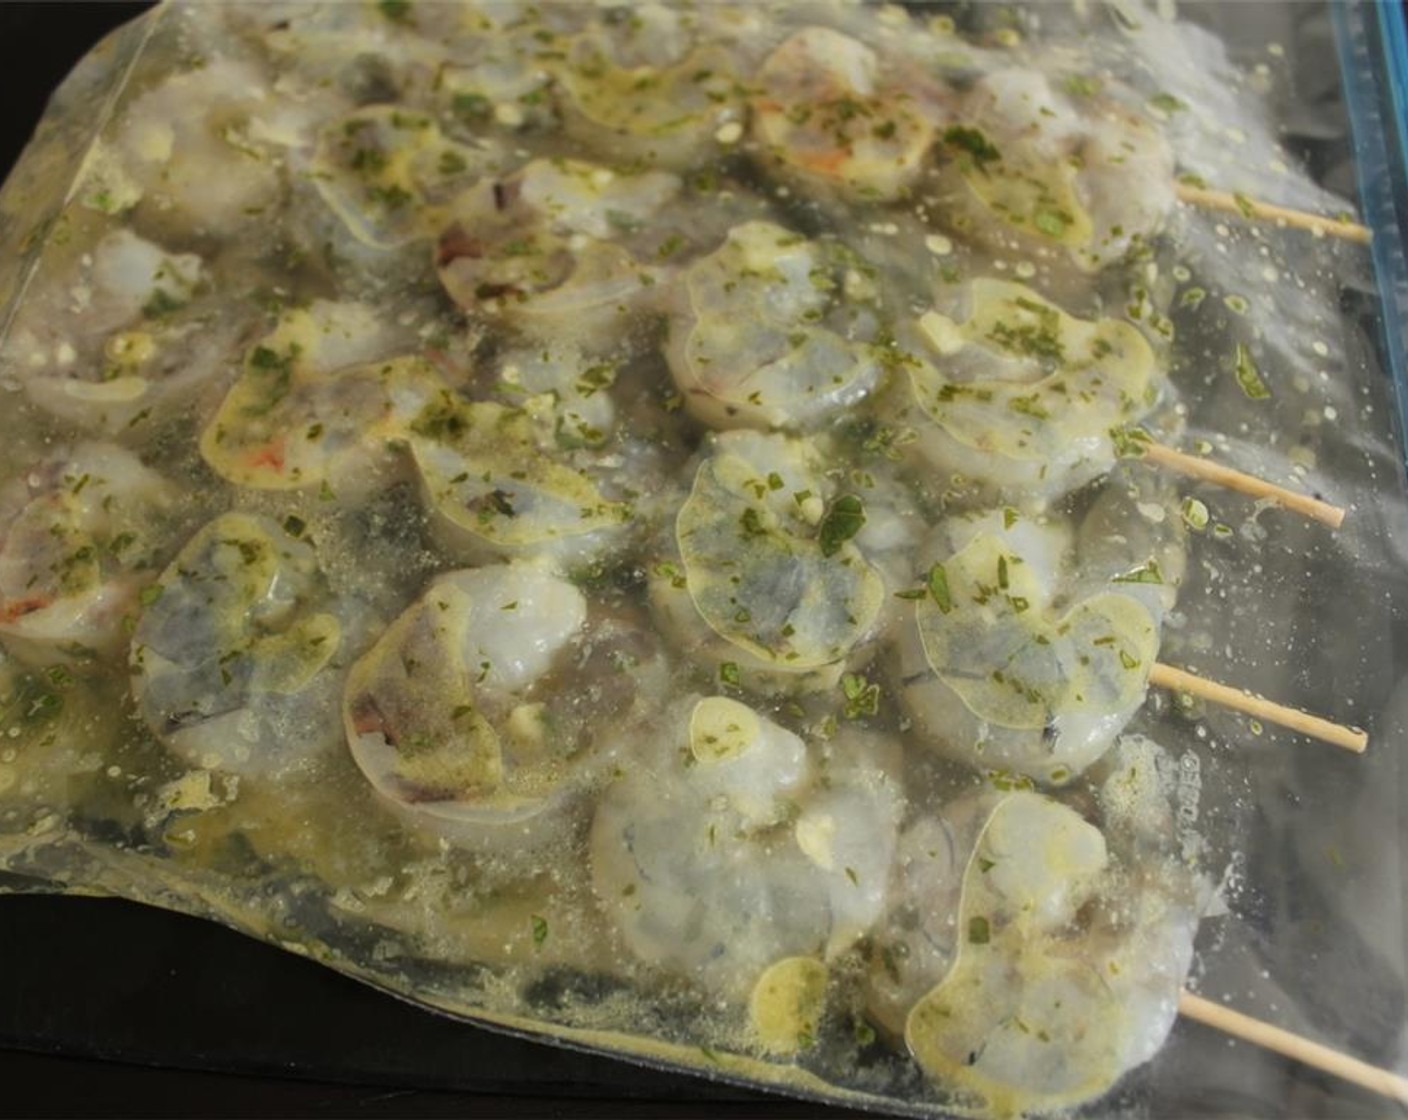 step 4 Place the shrimp skewers in a large Ziploc bag and pour the remaining marinade over them. Seal the bag, removing any excess air, and refrigerate for at least 30 minutes.